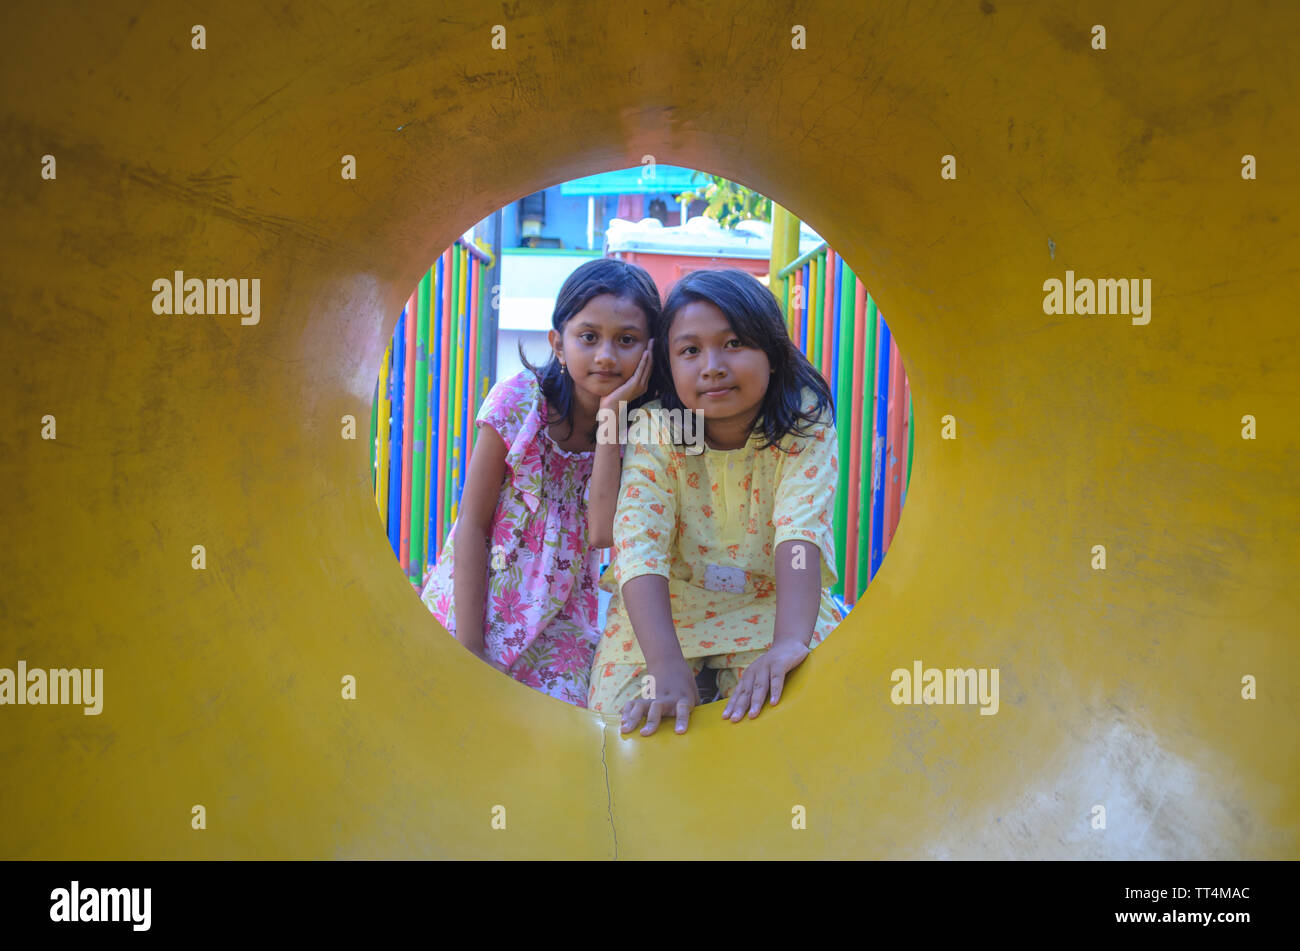 A portrait of two Indonesian black hair girls in the playground, Surabaya, Indonesia Stock Photo